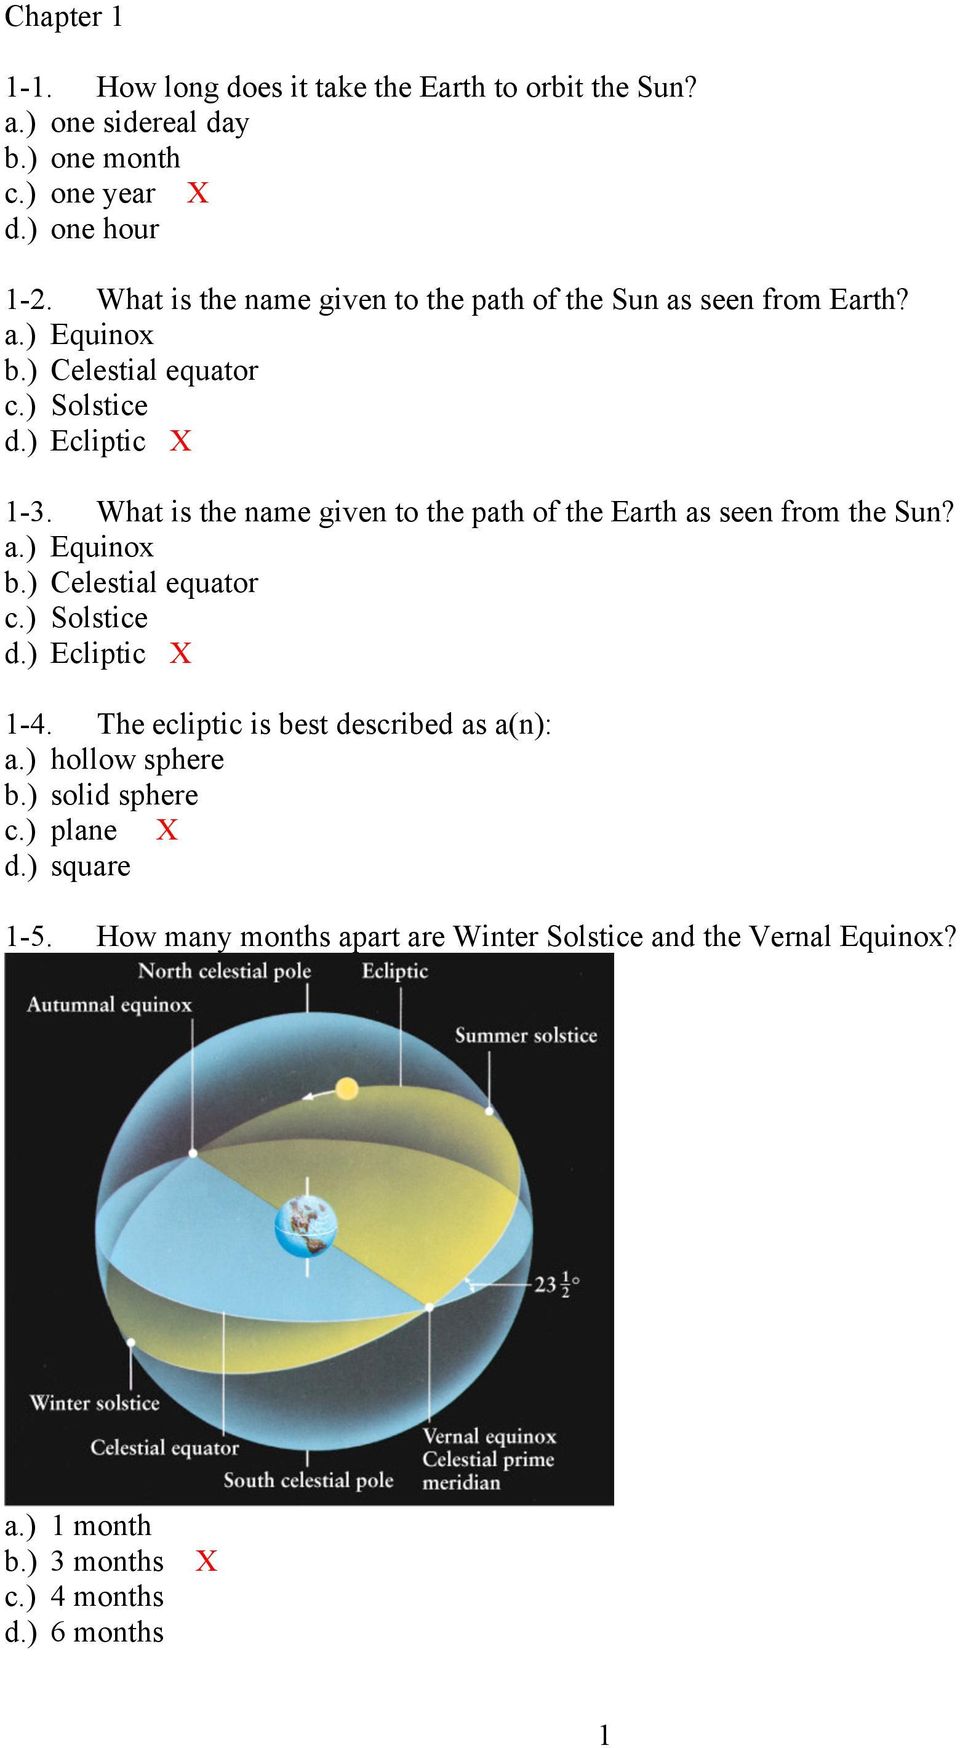 What is the name given to the path of the Earth as seen from the Sun? a.) Equinox b.) Celestial equator c.) Solstice d.) Ecliptic X 1-4.